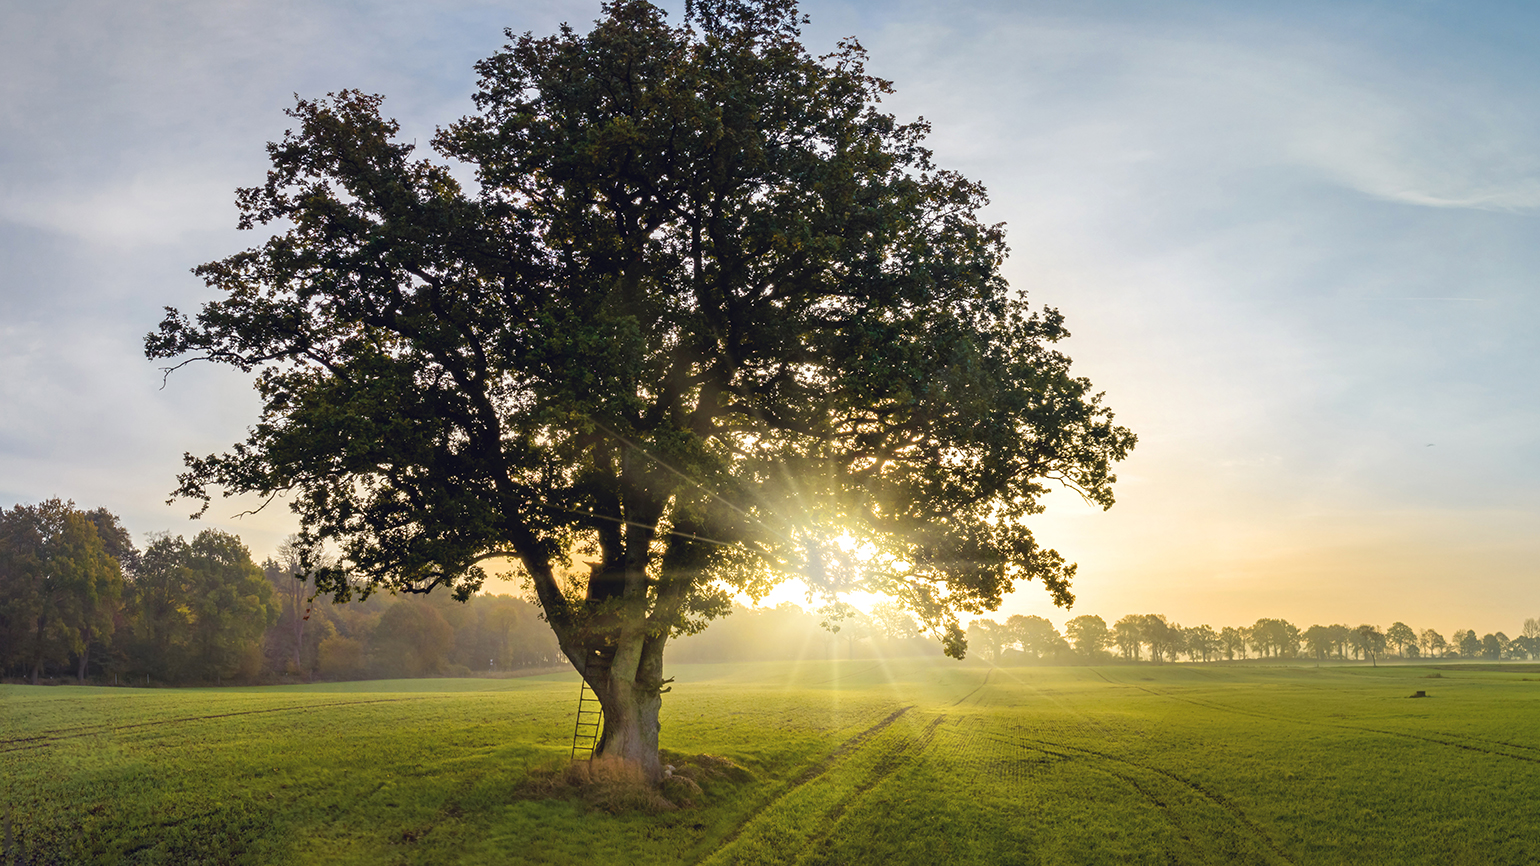 Royalty-free stock image: An oak tree represents a firm foundation of faith; Getty Images